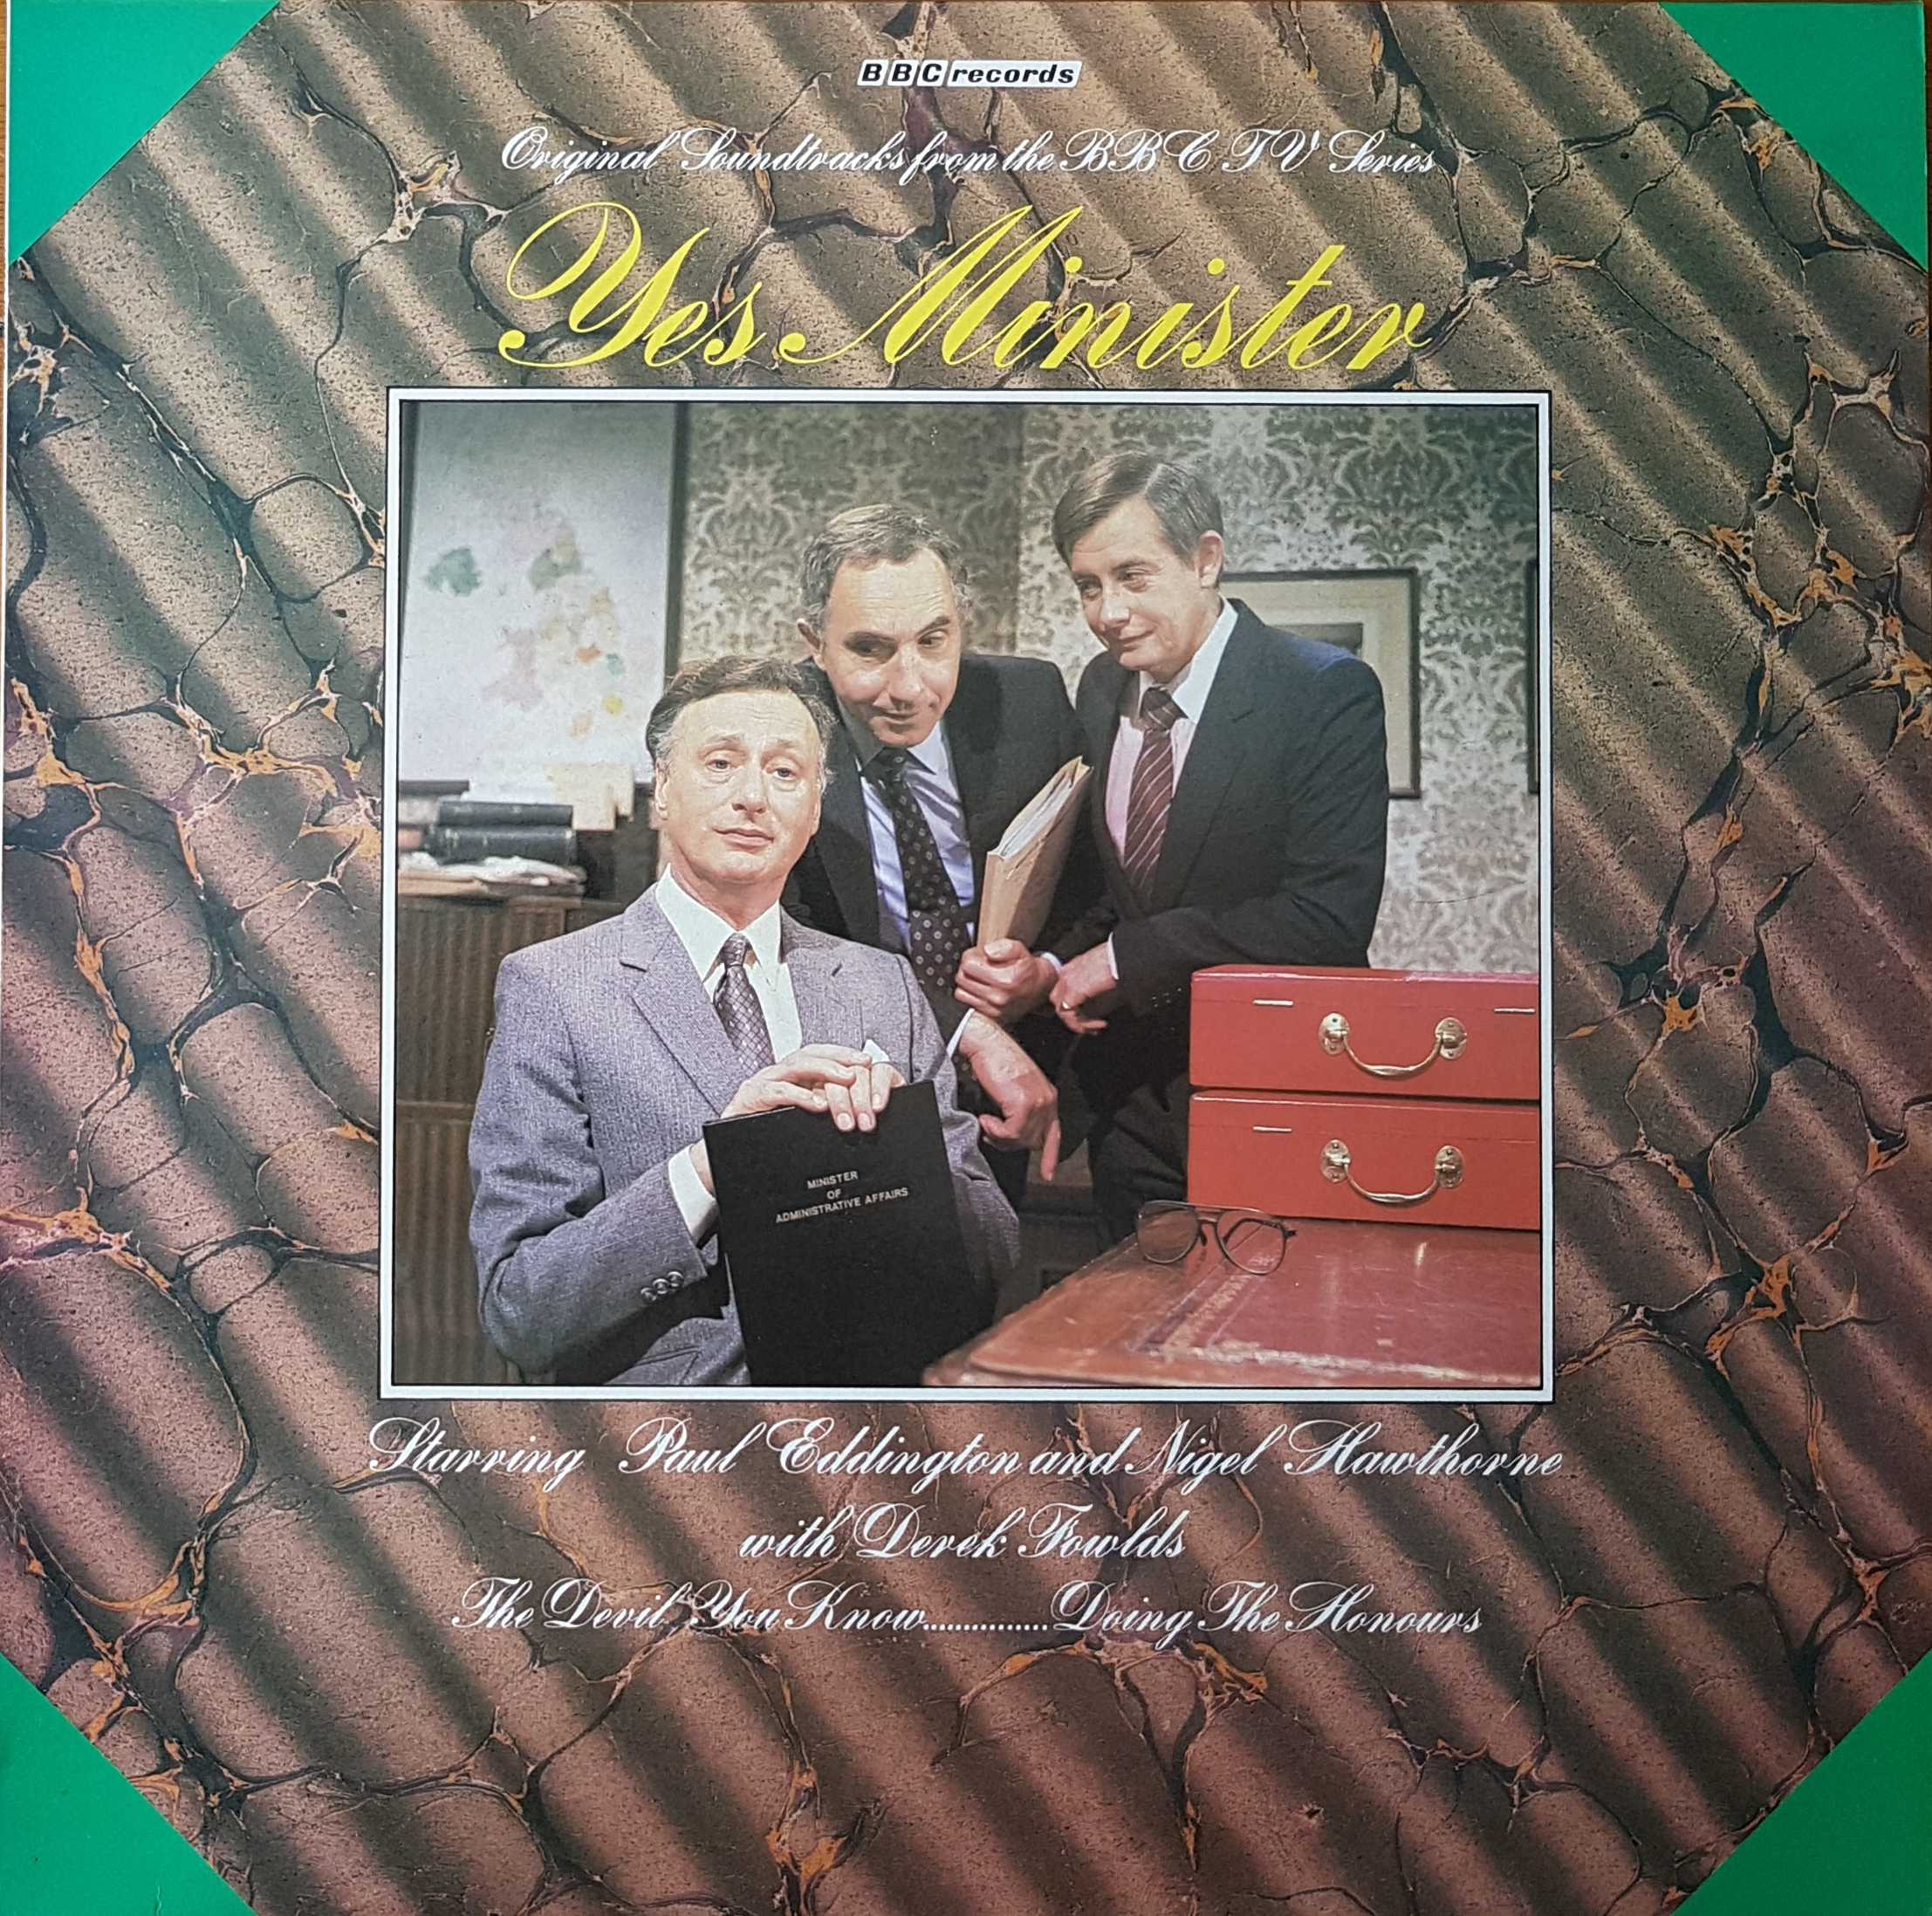 Picture of REB 432 Yes minister by artist Anthony Jay / Jonathan Lynn from the BBC albums - Records and Tapes library